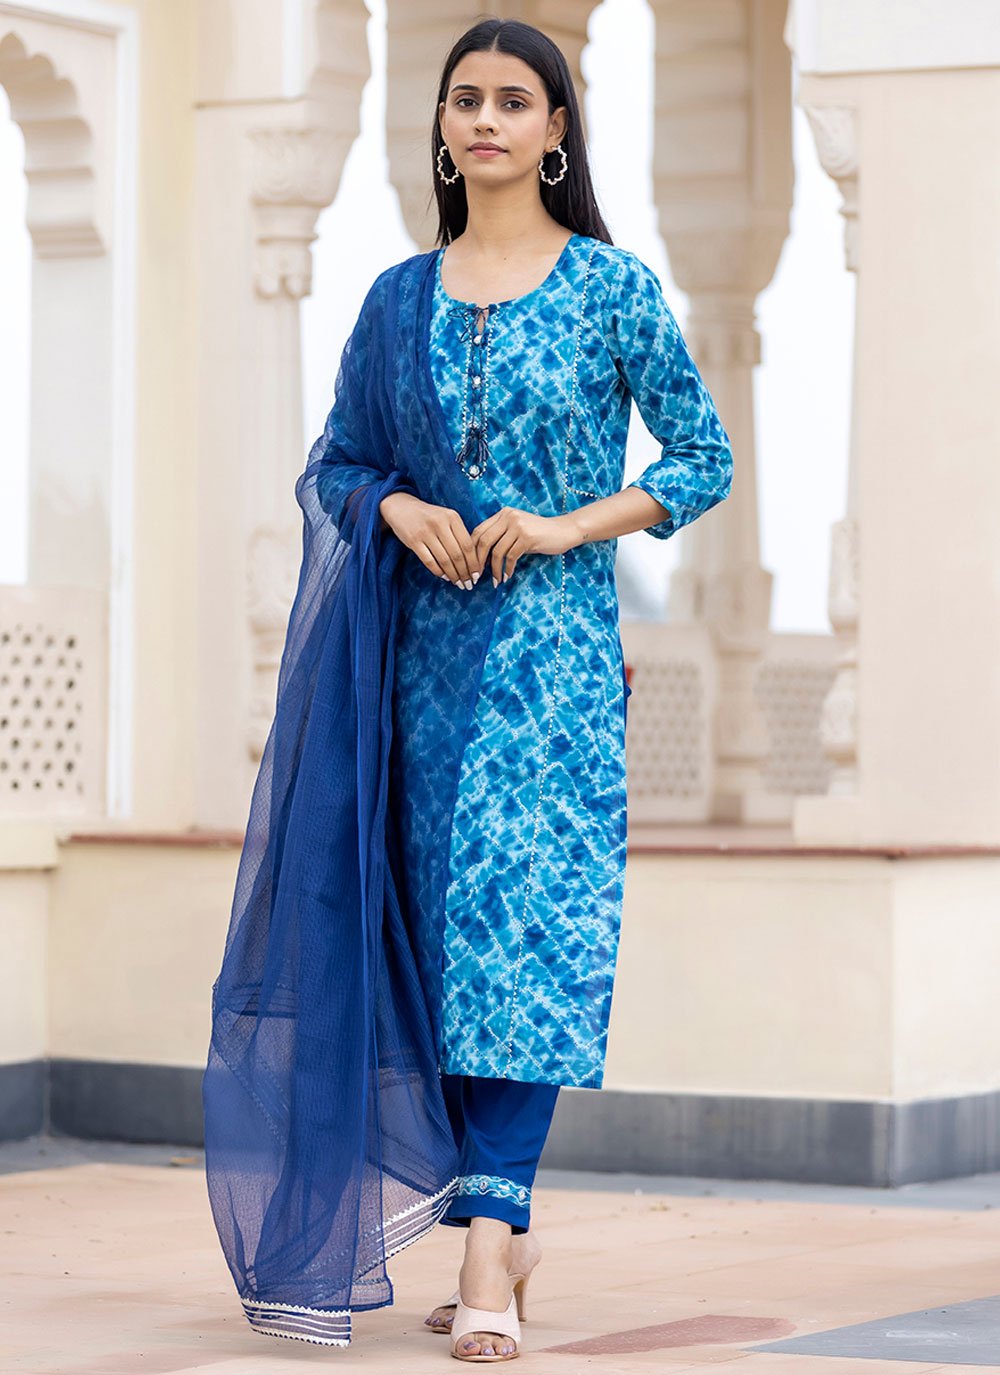 Comfortable Plain Blue Round Neck Cotton Ladies Salwar Suit For Daily Wear  at 2490.00 INR in Bathinda | Apple Blossom